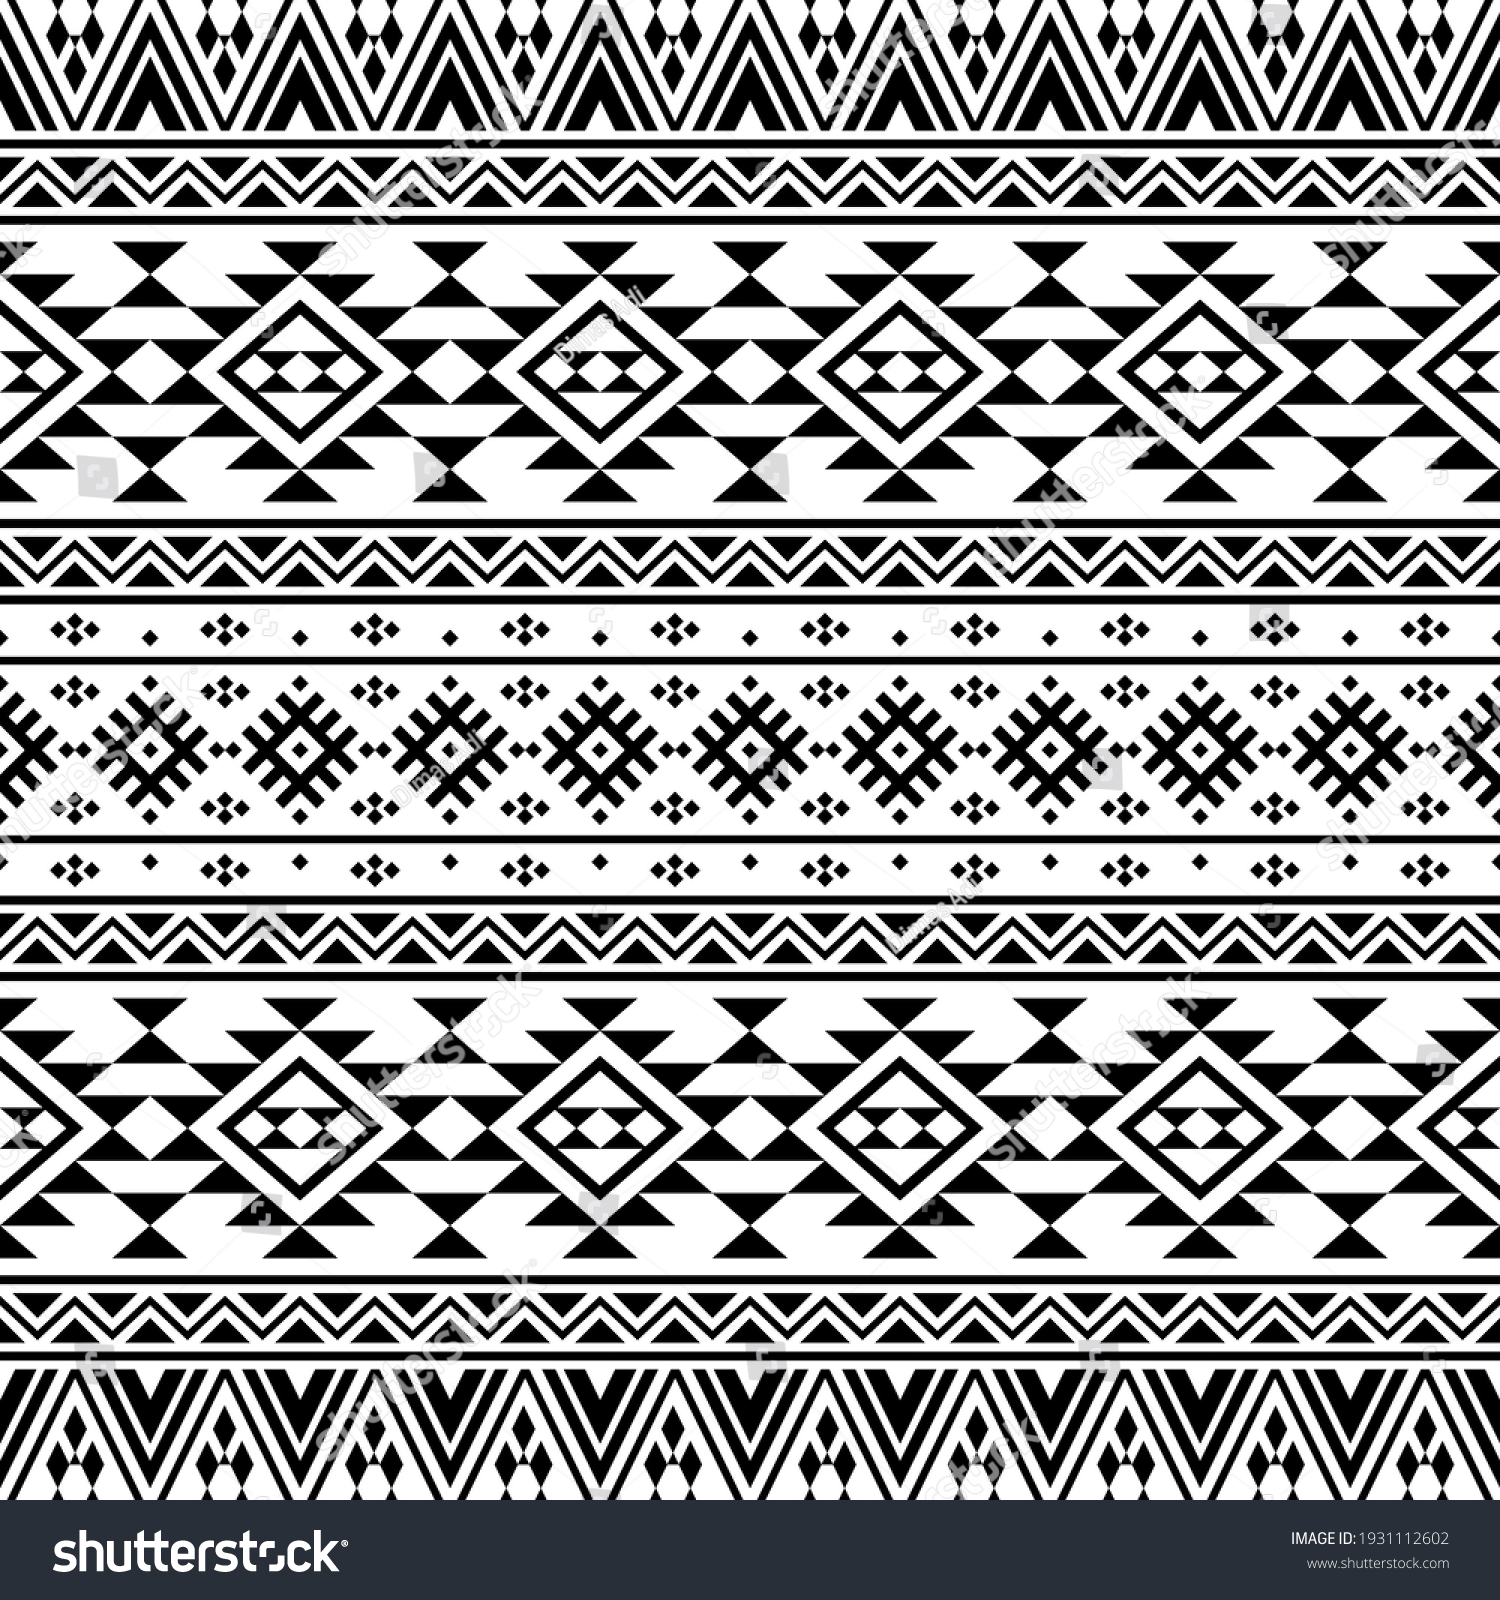 Aztec Seamless Ethnic Pattern Texture Background Stock Vector (Royalty ...